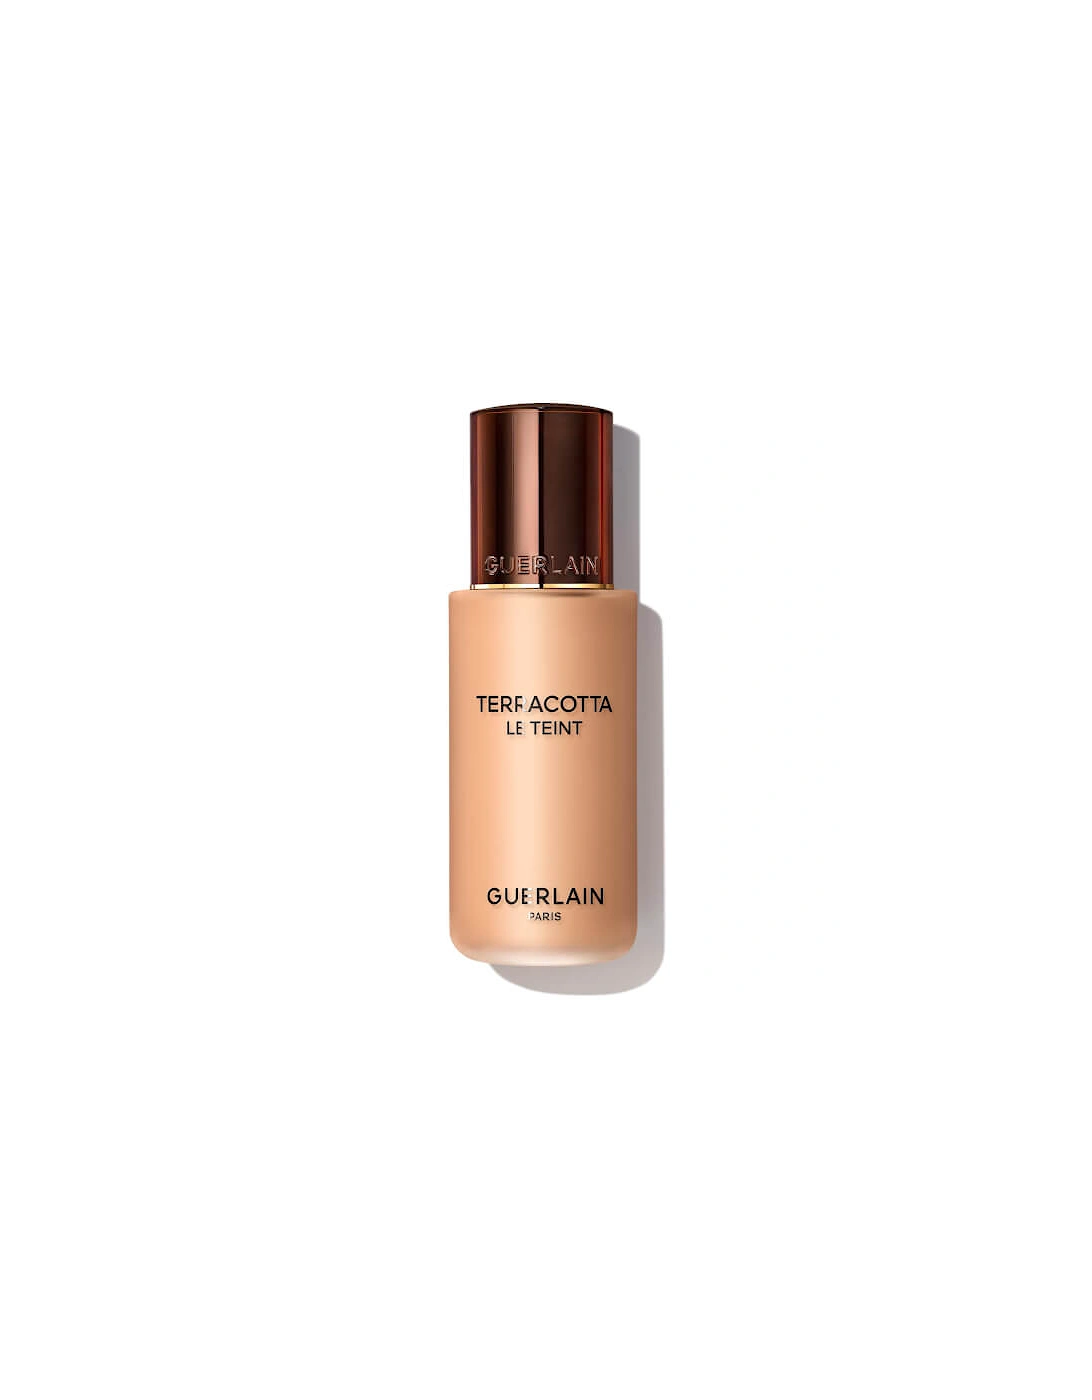 Terracotta Le Teint Healthy Glow Natural Perfection Foundation - 4N, 2 of 1